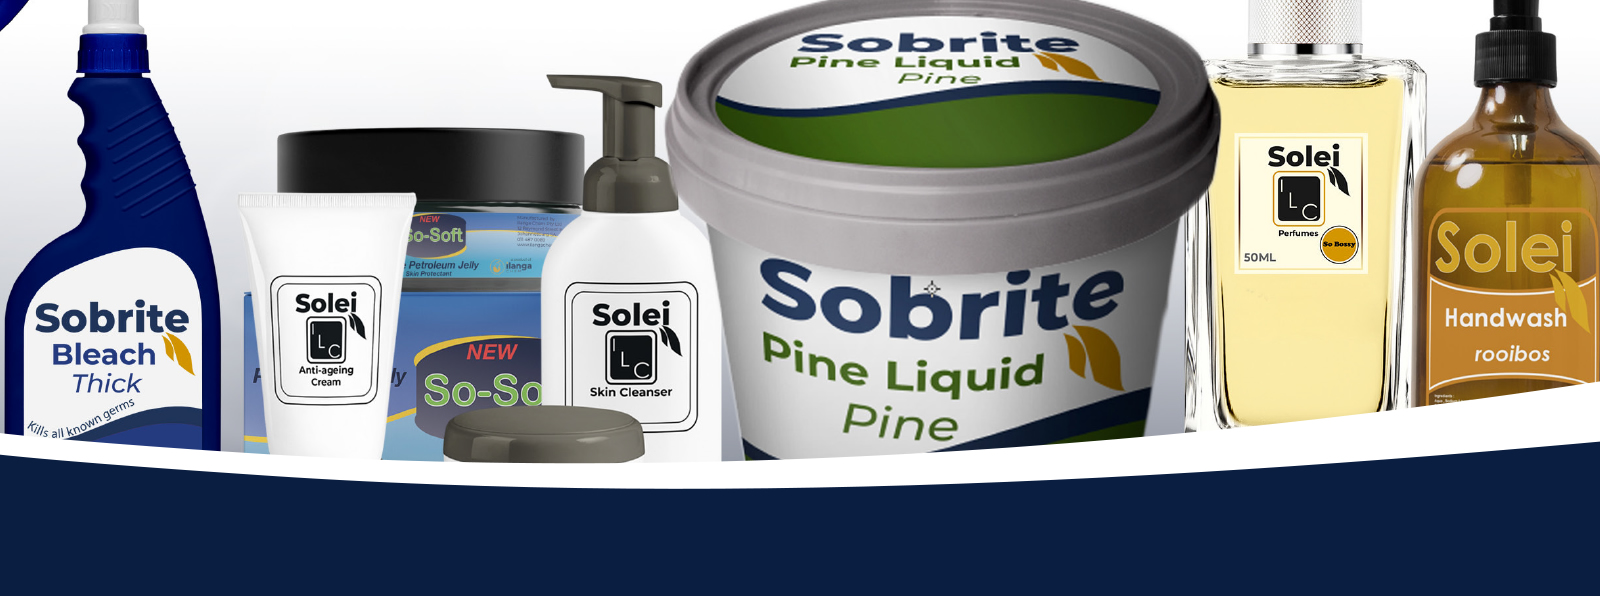 product-ranges-solei-perfume-sobrite-oven-cleaner-sobrite-bleach-lotion-petroleum-jelly-bg-for-shop.jpg